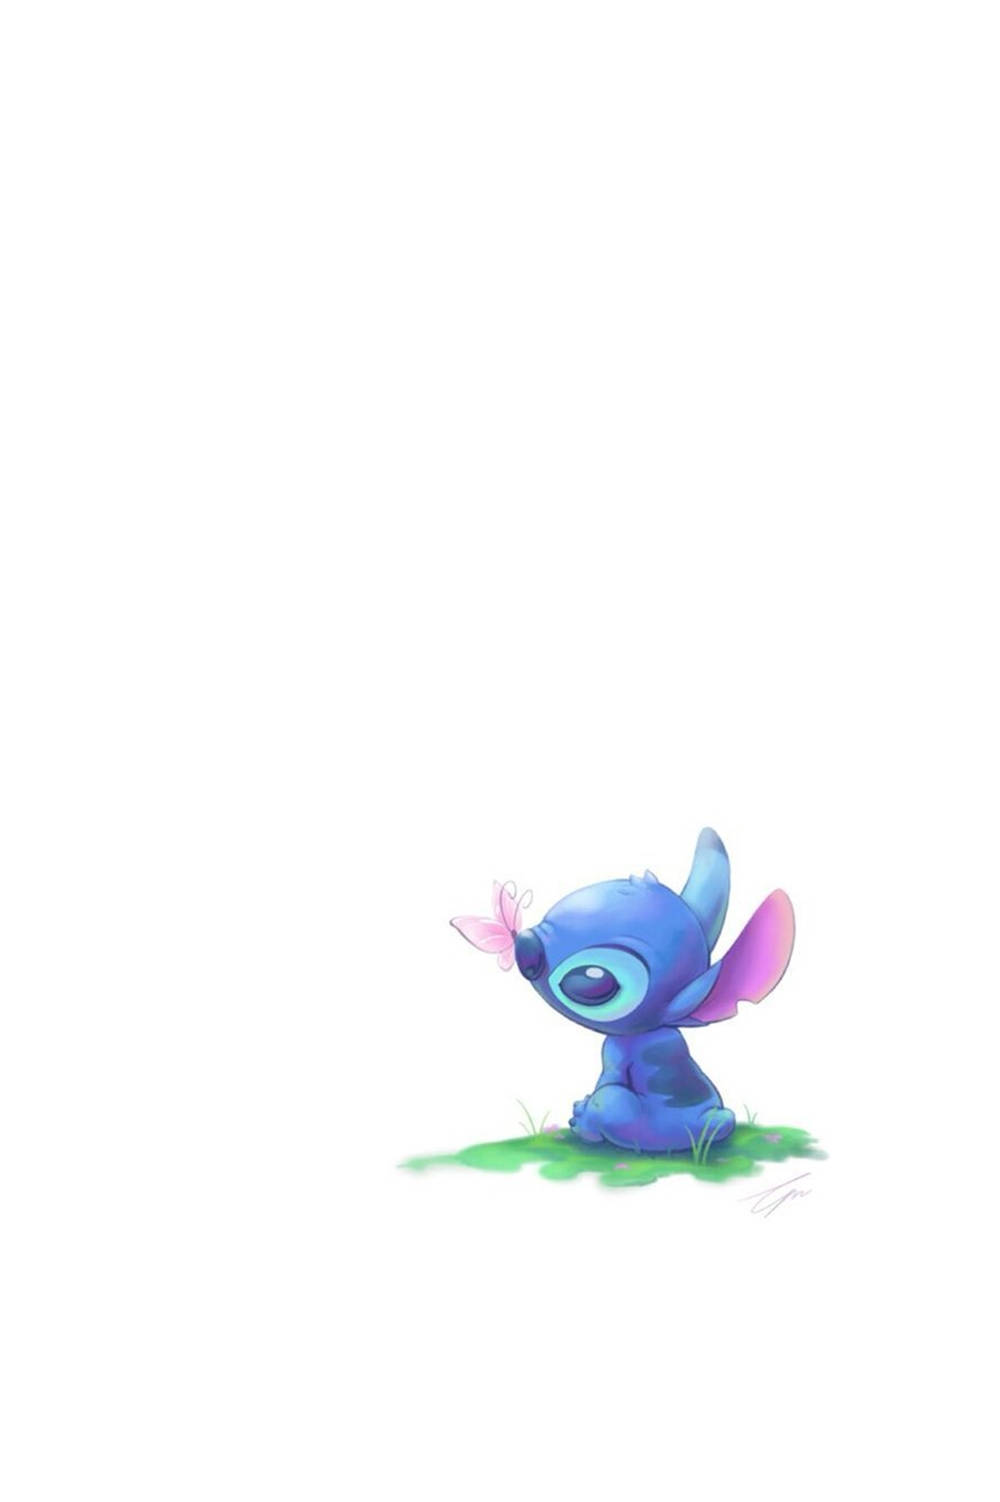 Cute Stitch With Butterfly Iphone Background